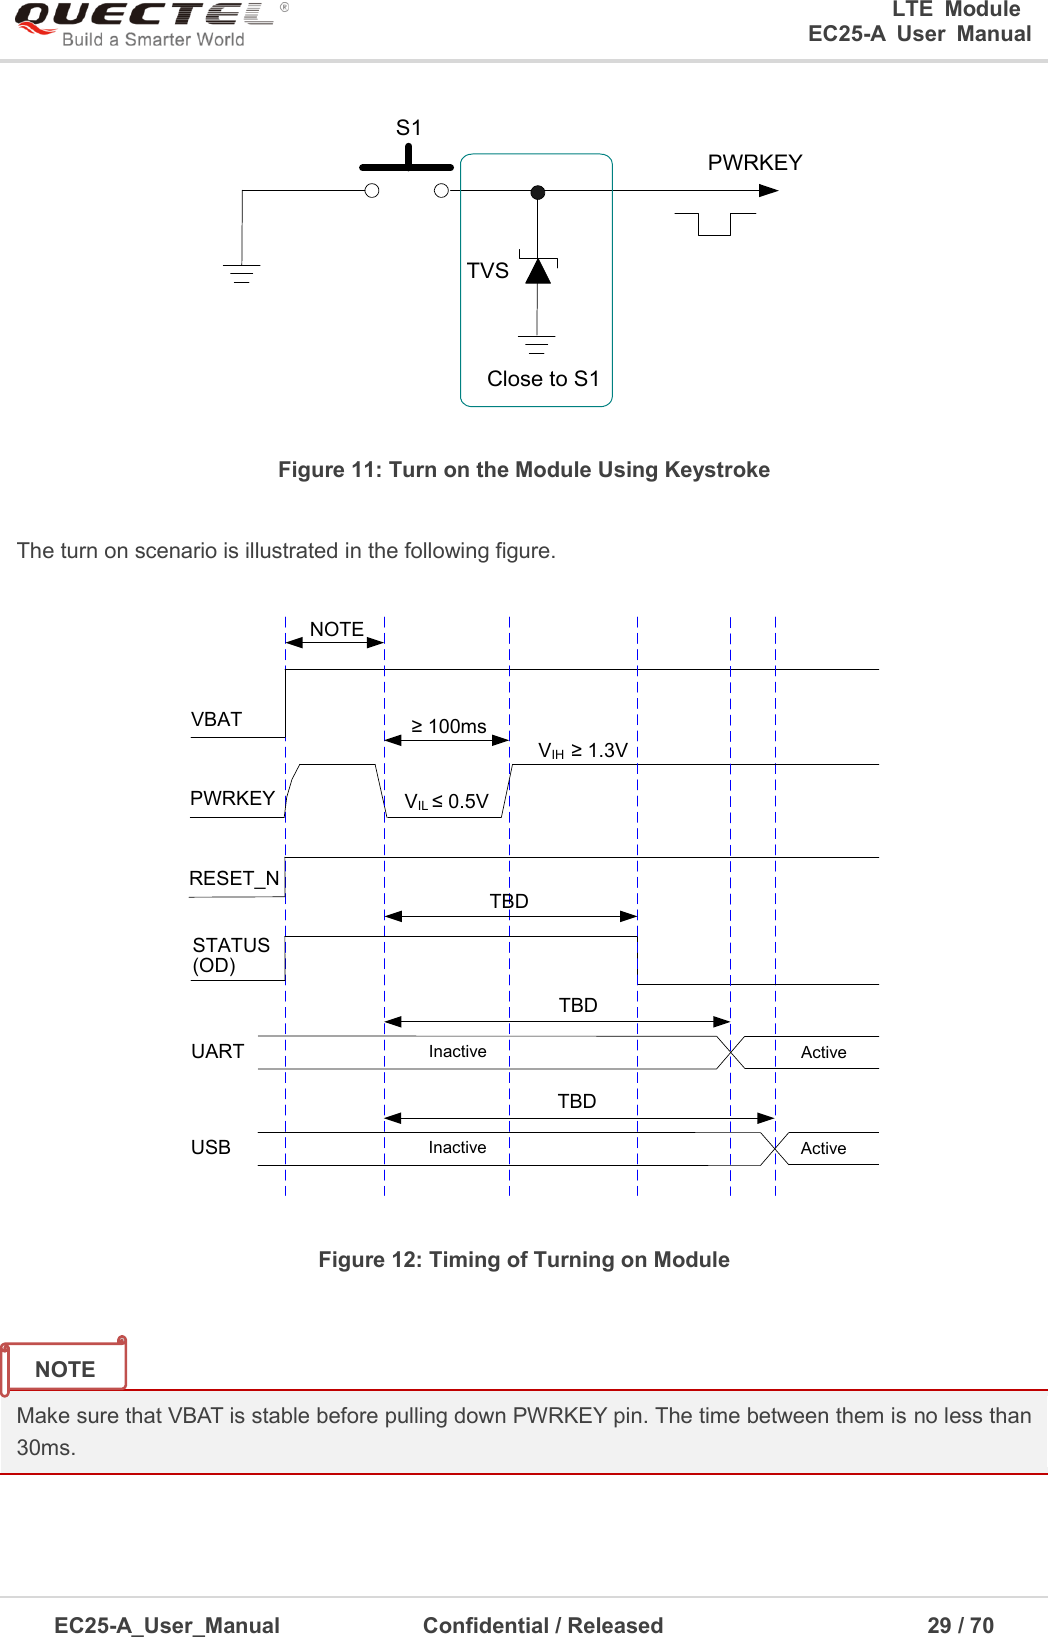 0      LTE  Module      EC25-A  User  Manual EC25-A_User_Manual  Confidential / Released      29 / 7  PWRKEYS1Close to S1TVSFigure 11: Turn on the Module Using Keystroke The turn on scenario is illustrated in the following figure. VIL ≤ 0.5VVIH  ≥ 1.3VVBATPWRKEY≥ 100msRESET_NSTATUS(OD)Inactive ActiveUARTNOTEInactive ActiveUSBTBDTBDTBDFigure 12: Timing of Turning on Module Make sure that VBAT is stable before pulling down PWRKEY pin. The time between them is no less than 30ms. NOTE 